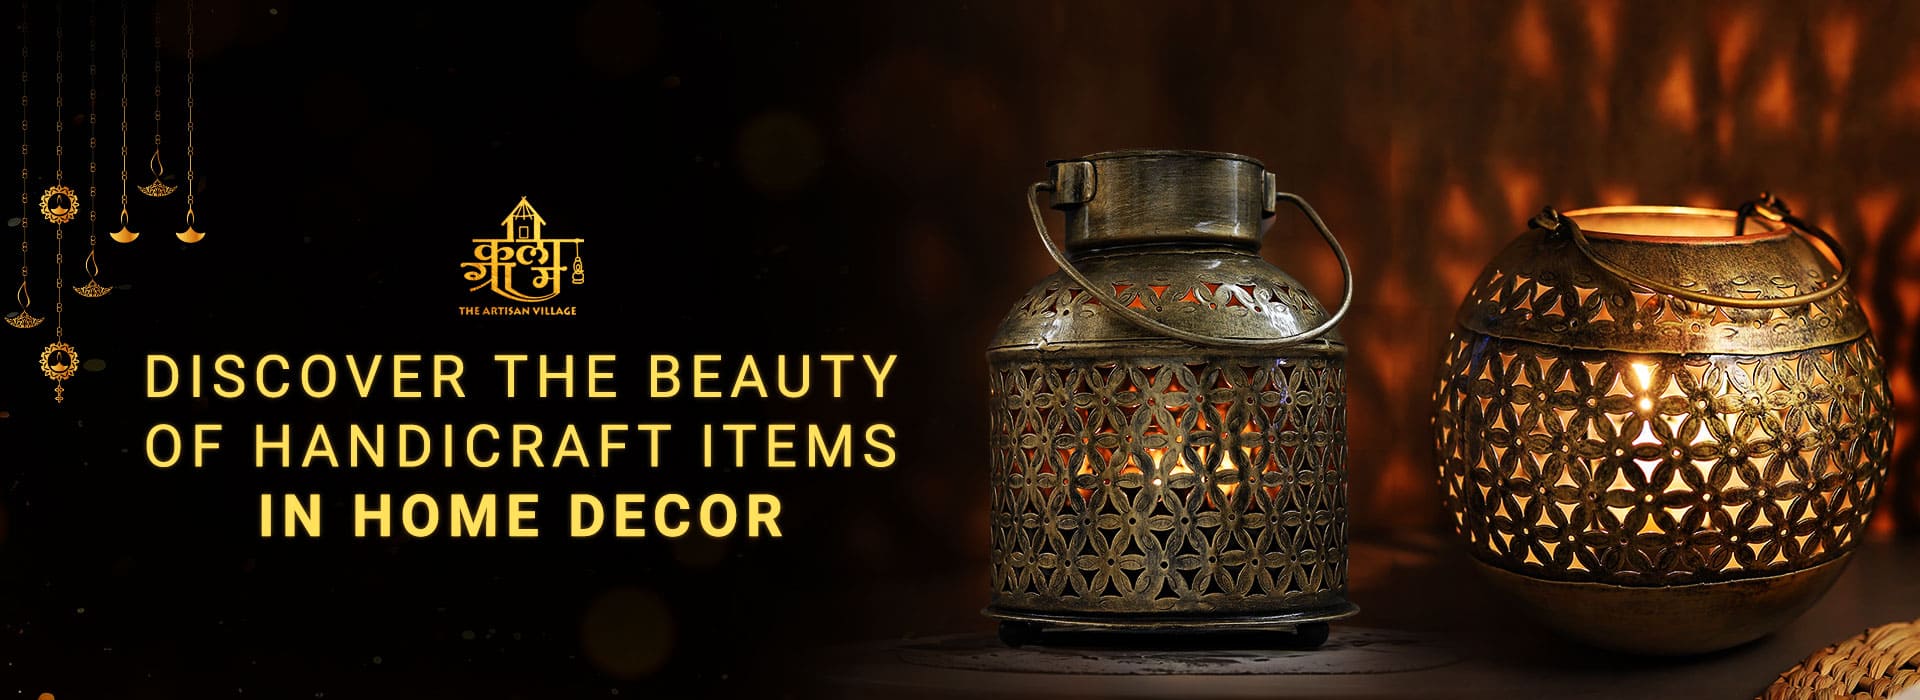 Discover the Beauty of Handicraft Items in Home Decor